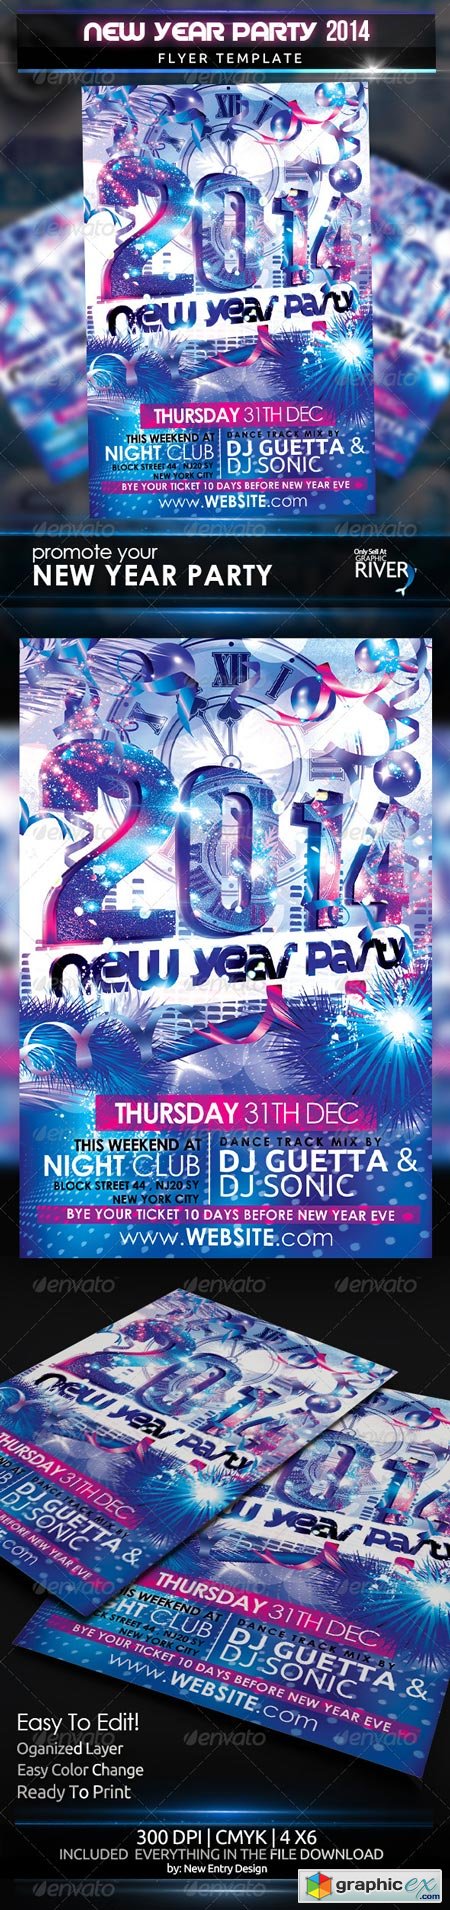 New Year Party 2014 Flyer Template 6296013